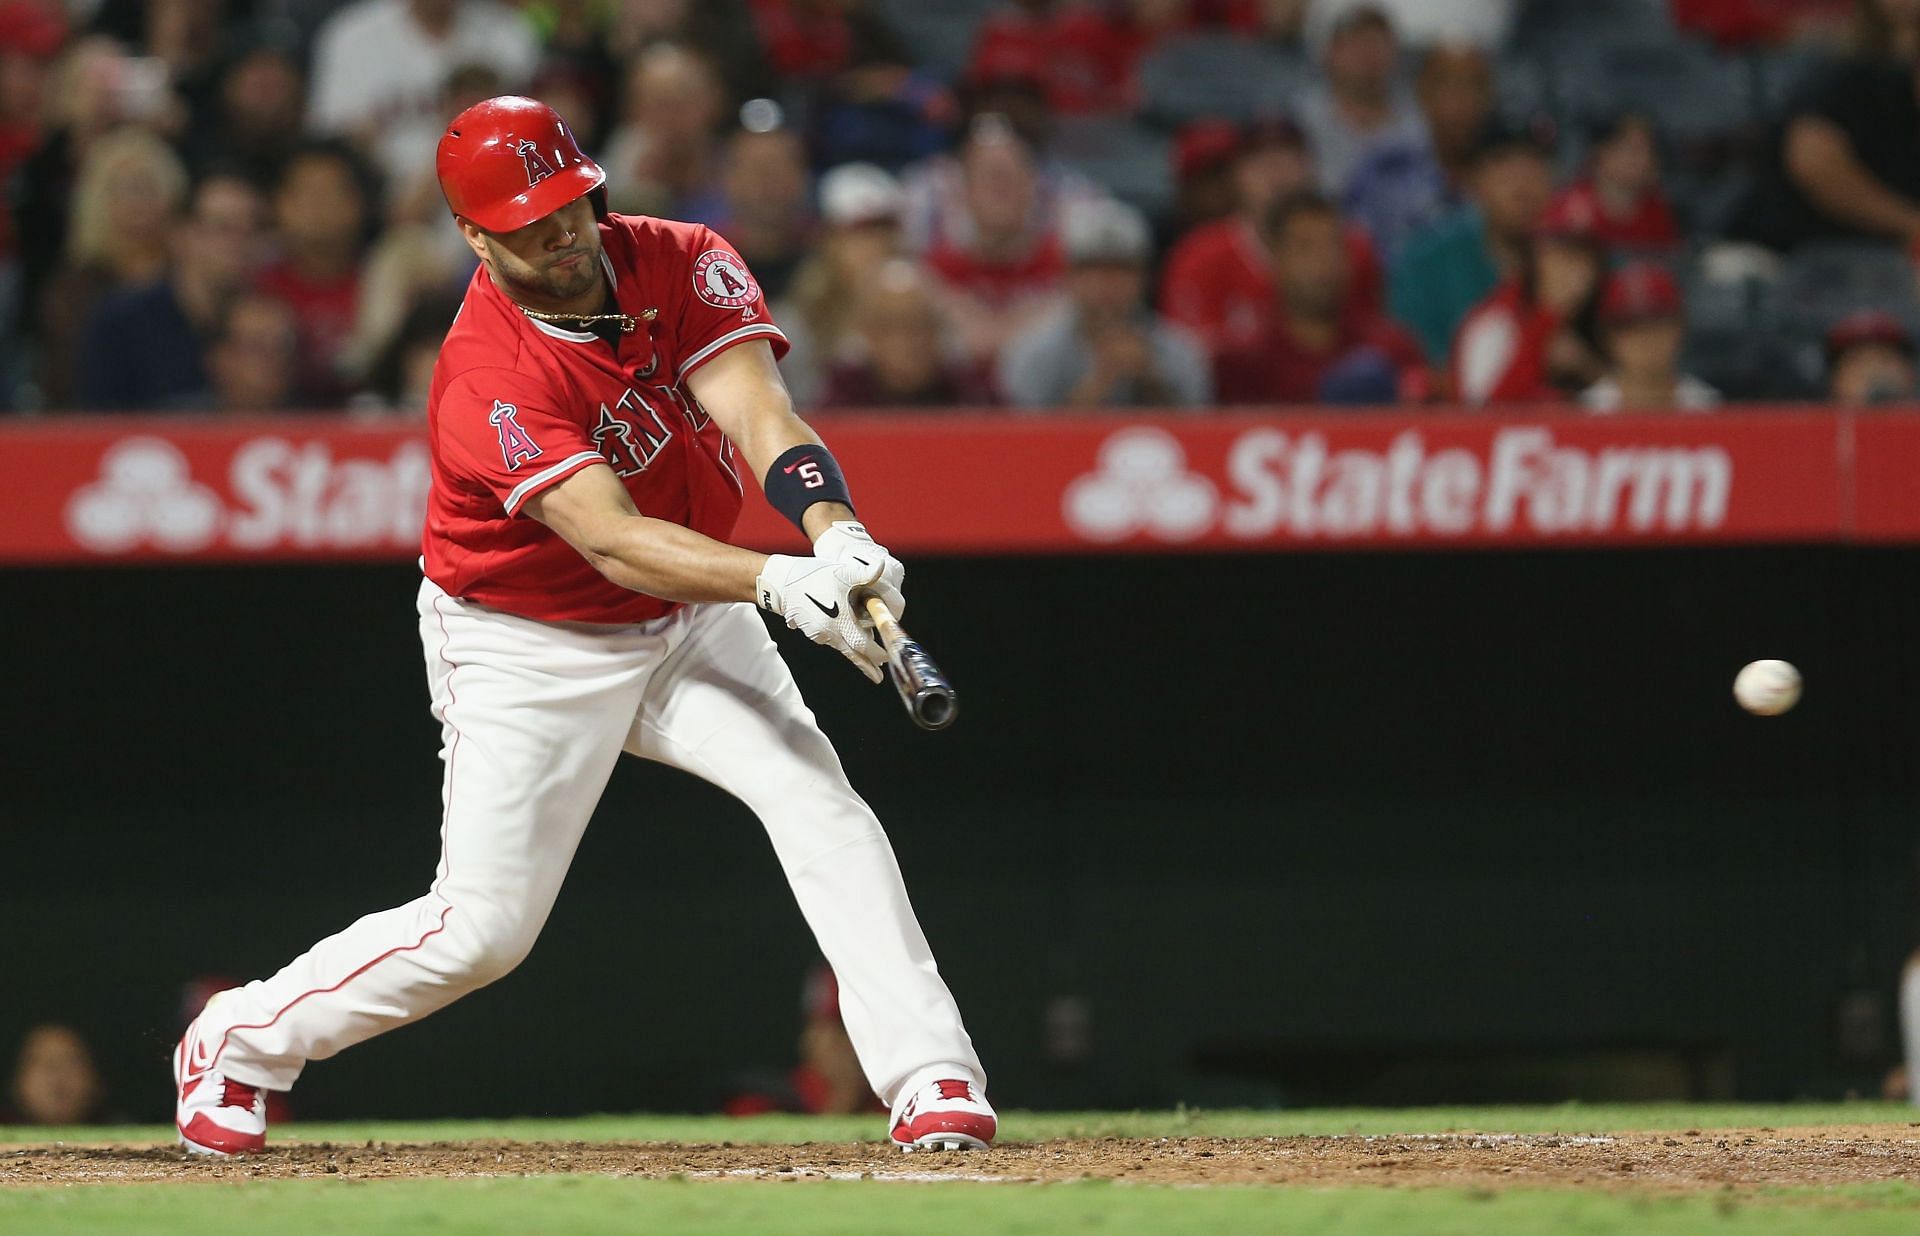 MLB News Roundup: Albert Pujols rejoins LA Angles, Lance McCullers injured  and more - February 23 2023